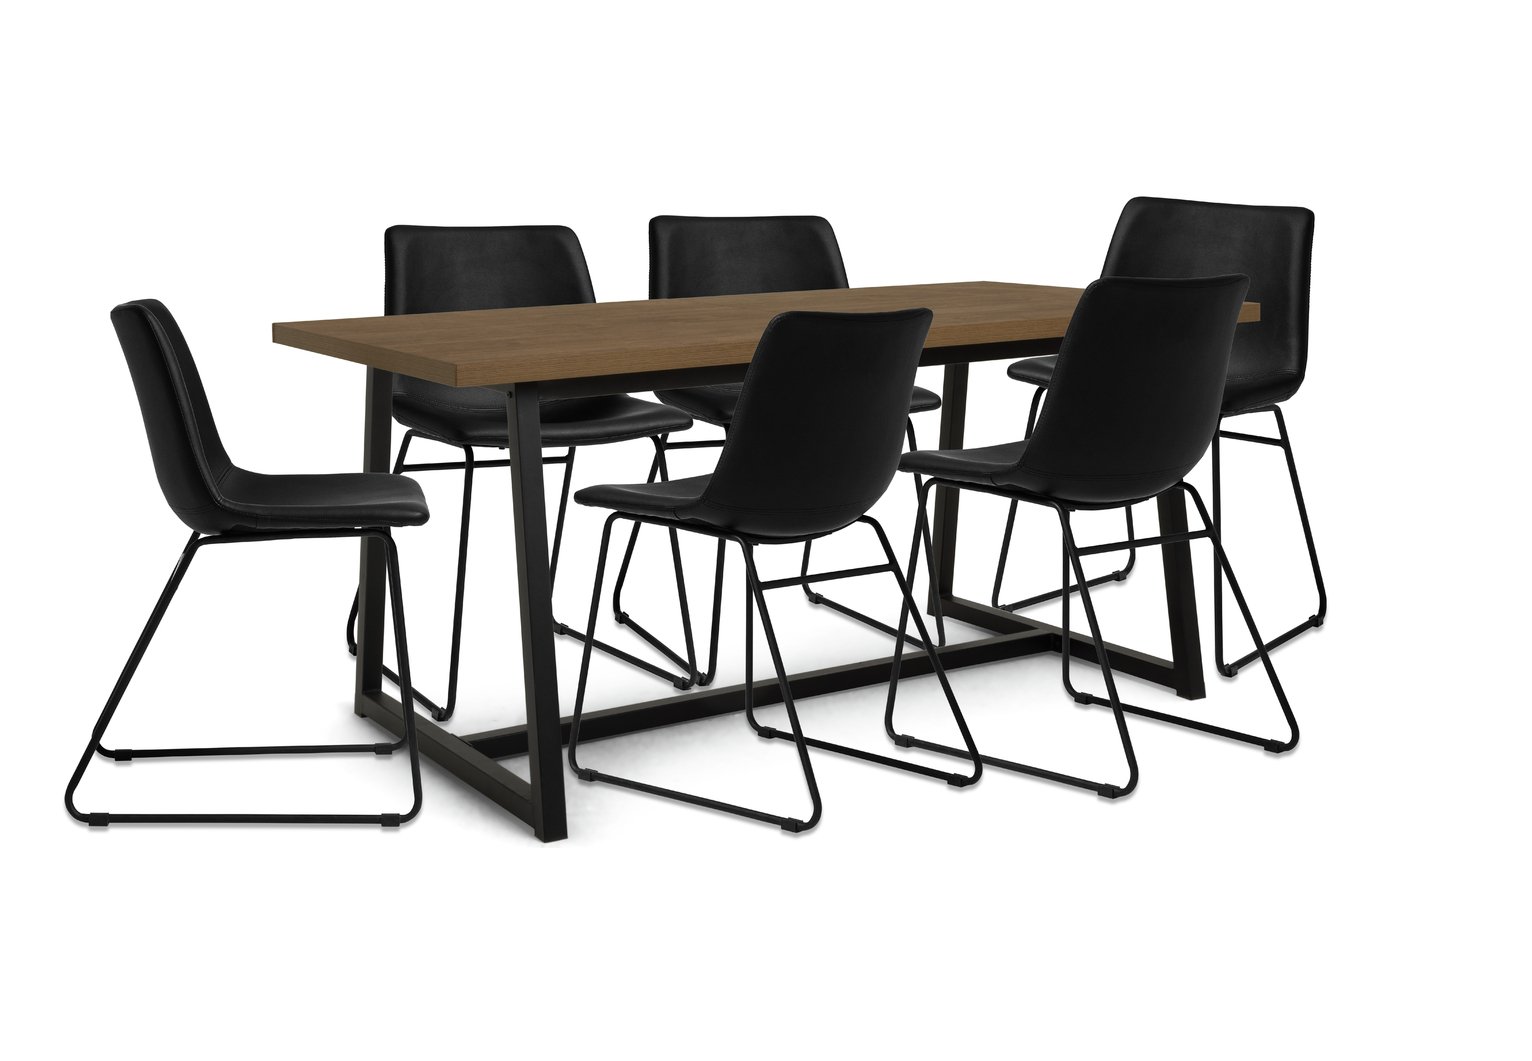 Habitat Nomad Metal Extending Dining Table & 6 Black Chairs